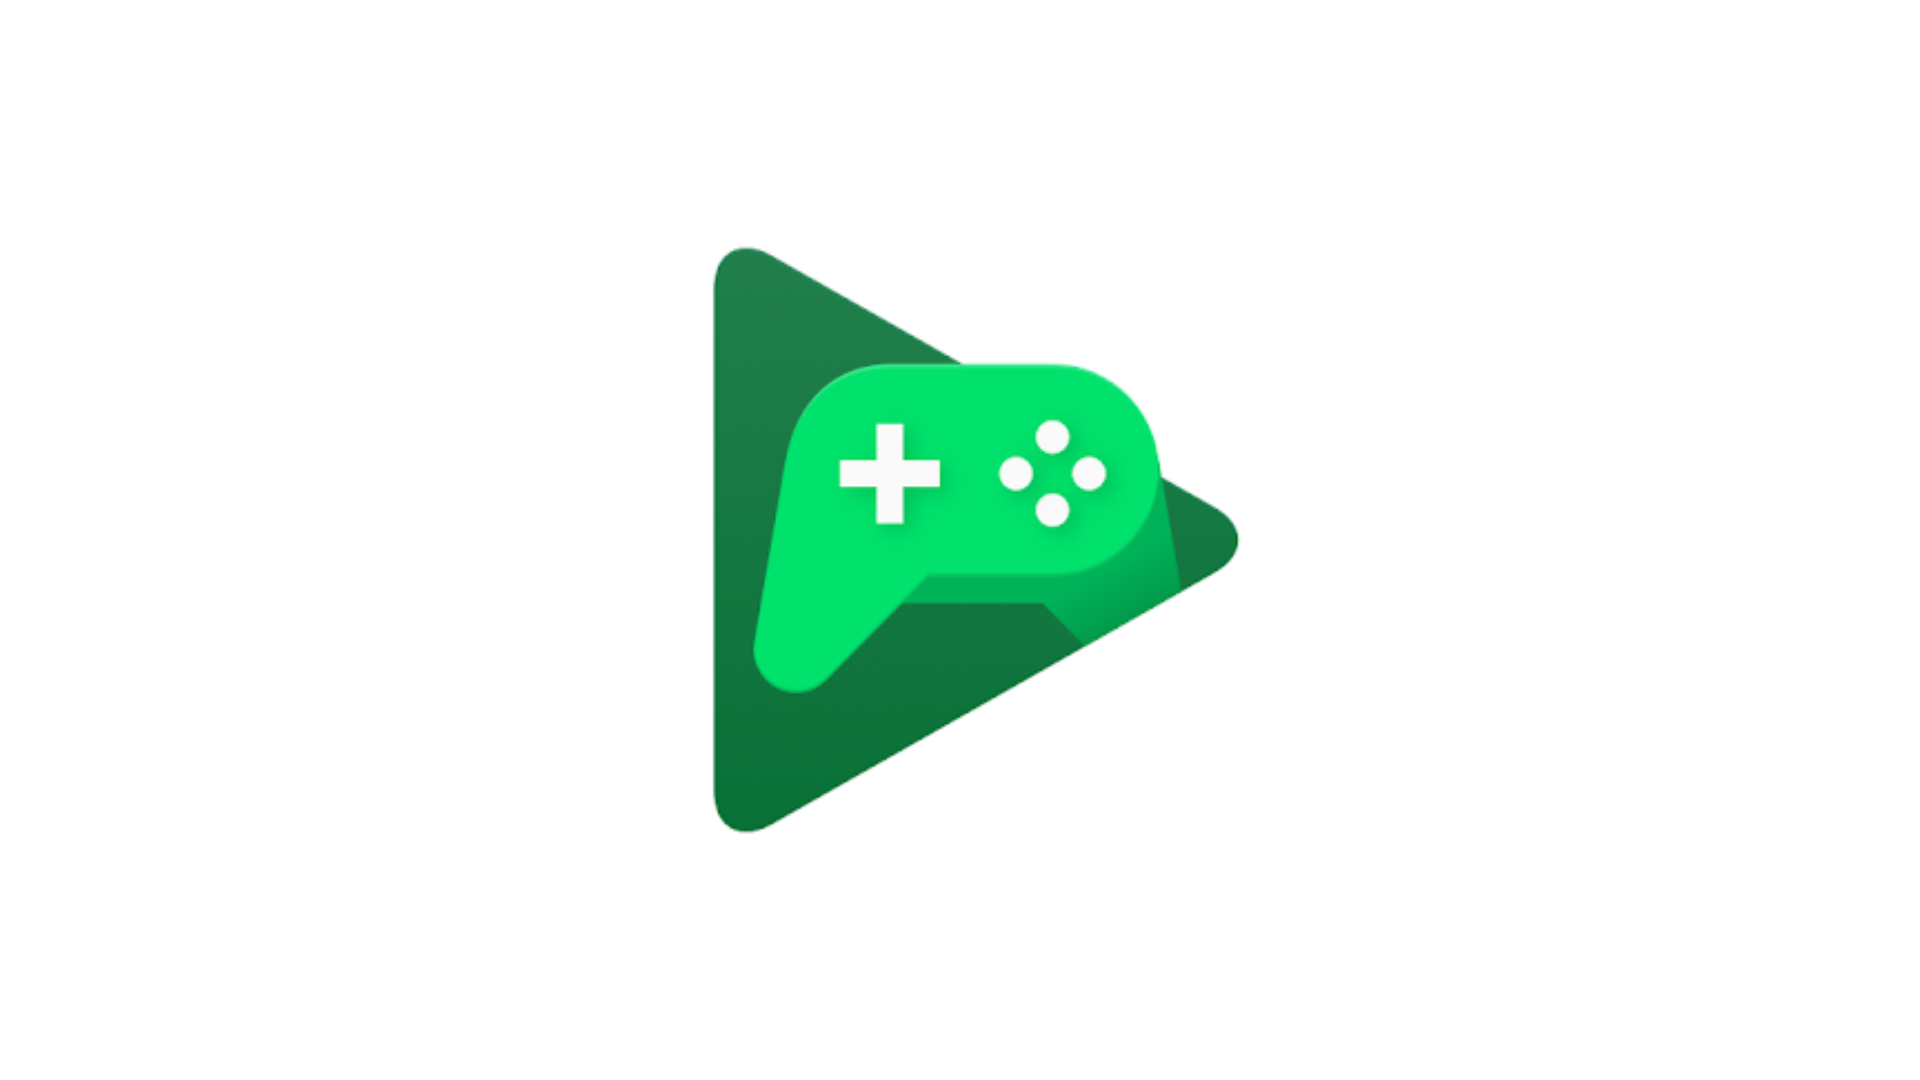 Google Play Games beta is here. : r/Stadia